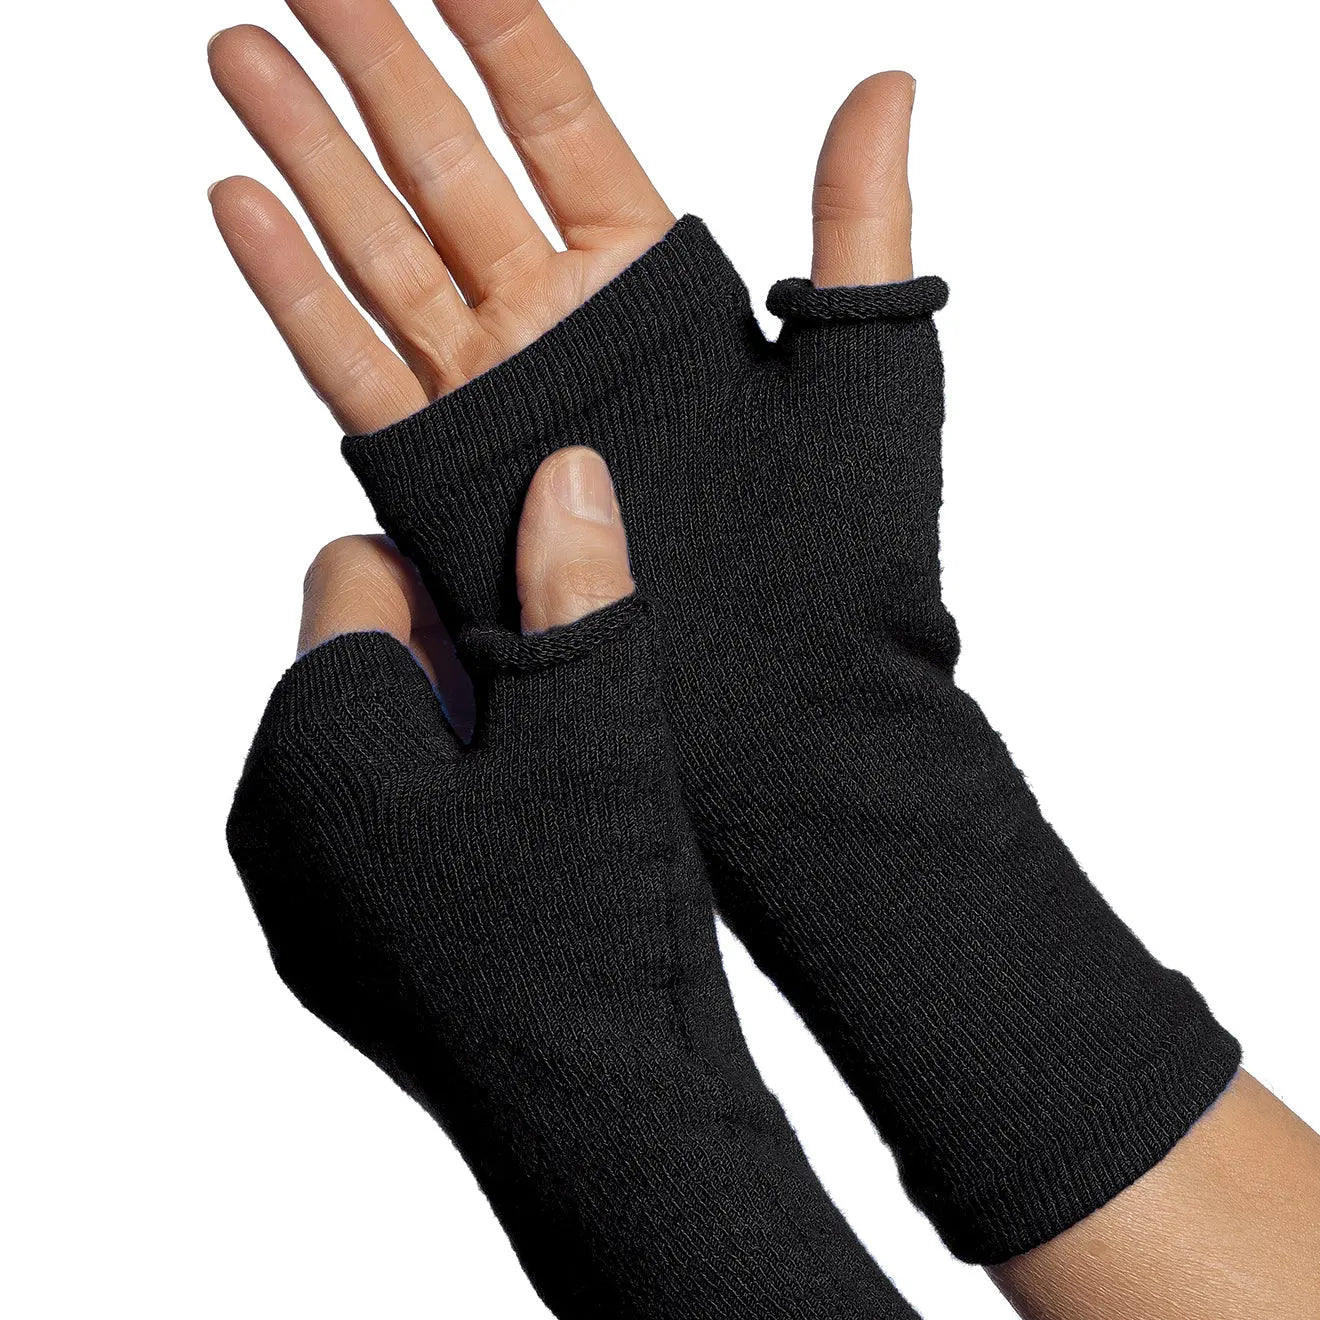 Fingerless Gloves - Protection for Hands (pair) Limbkeepers